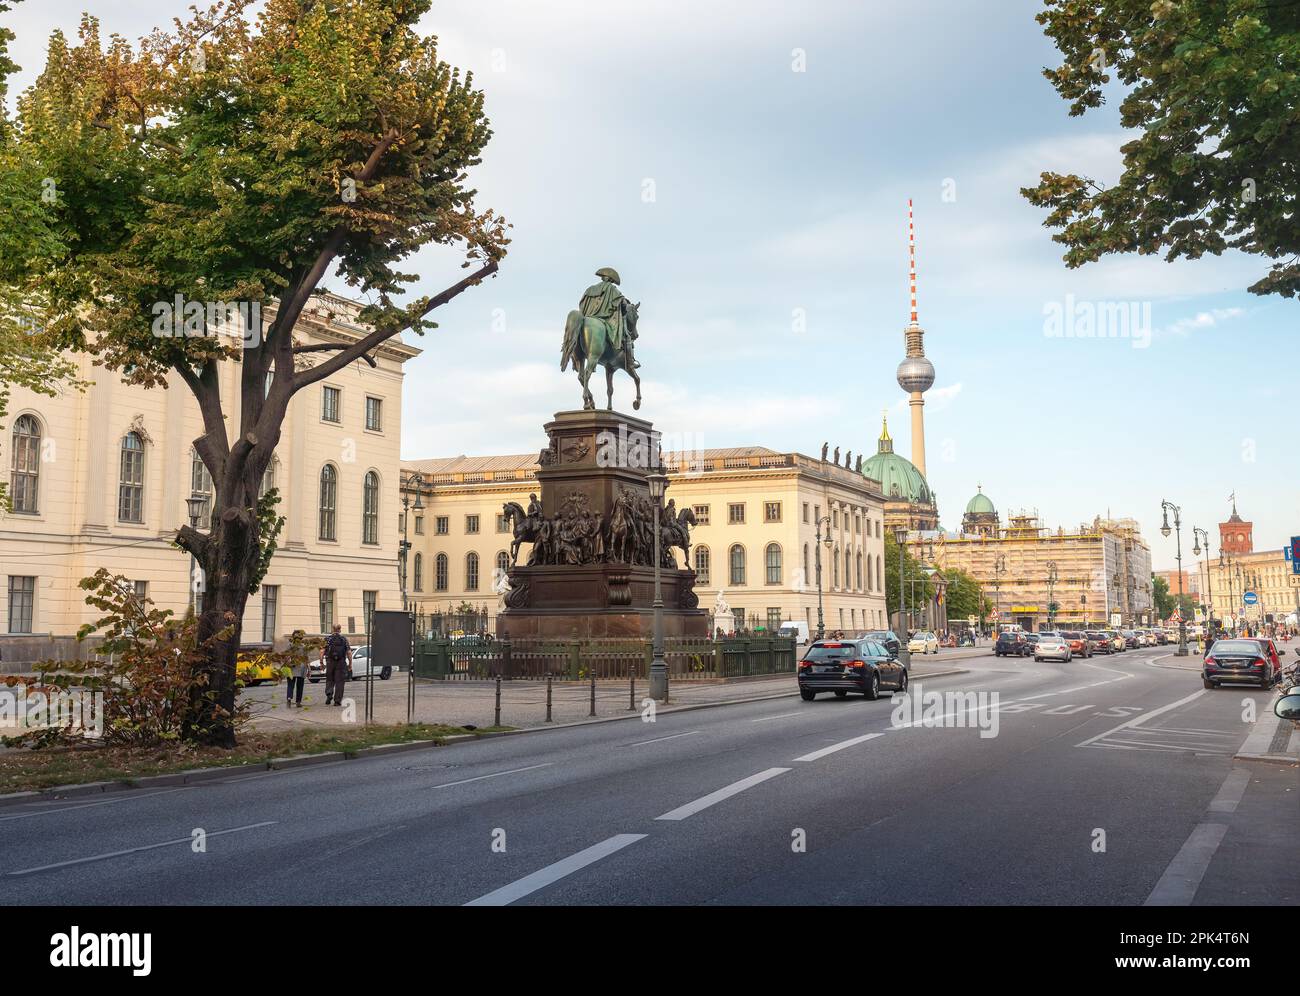 Unter den Linden Boulevard with Frederick the Great Statue and Fernsehturm TV Tower - Berlin, Germany Stock Photo